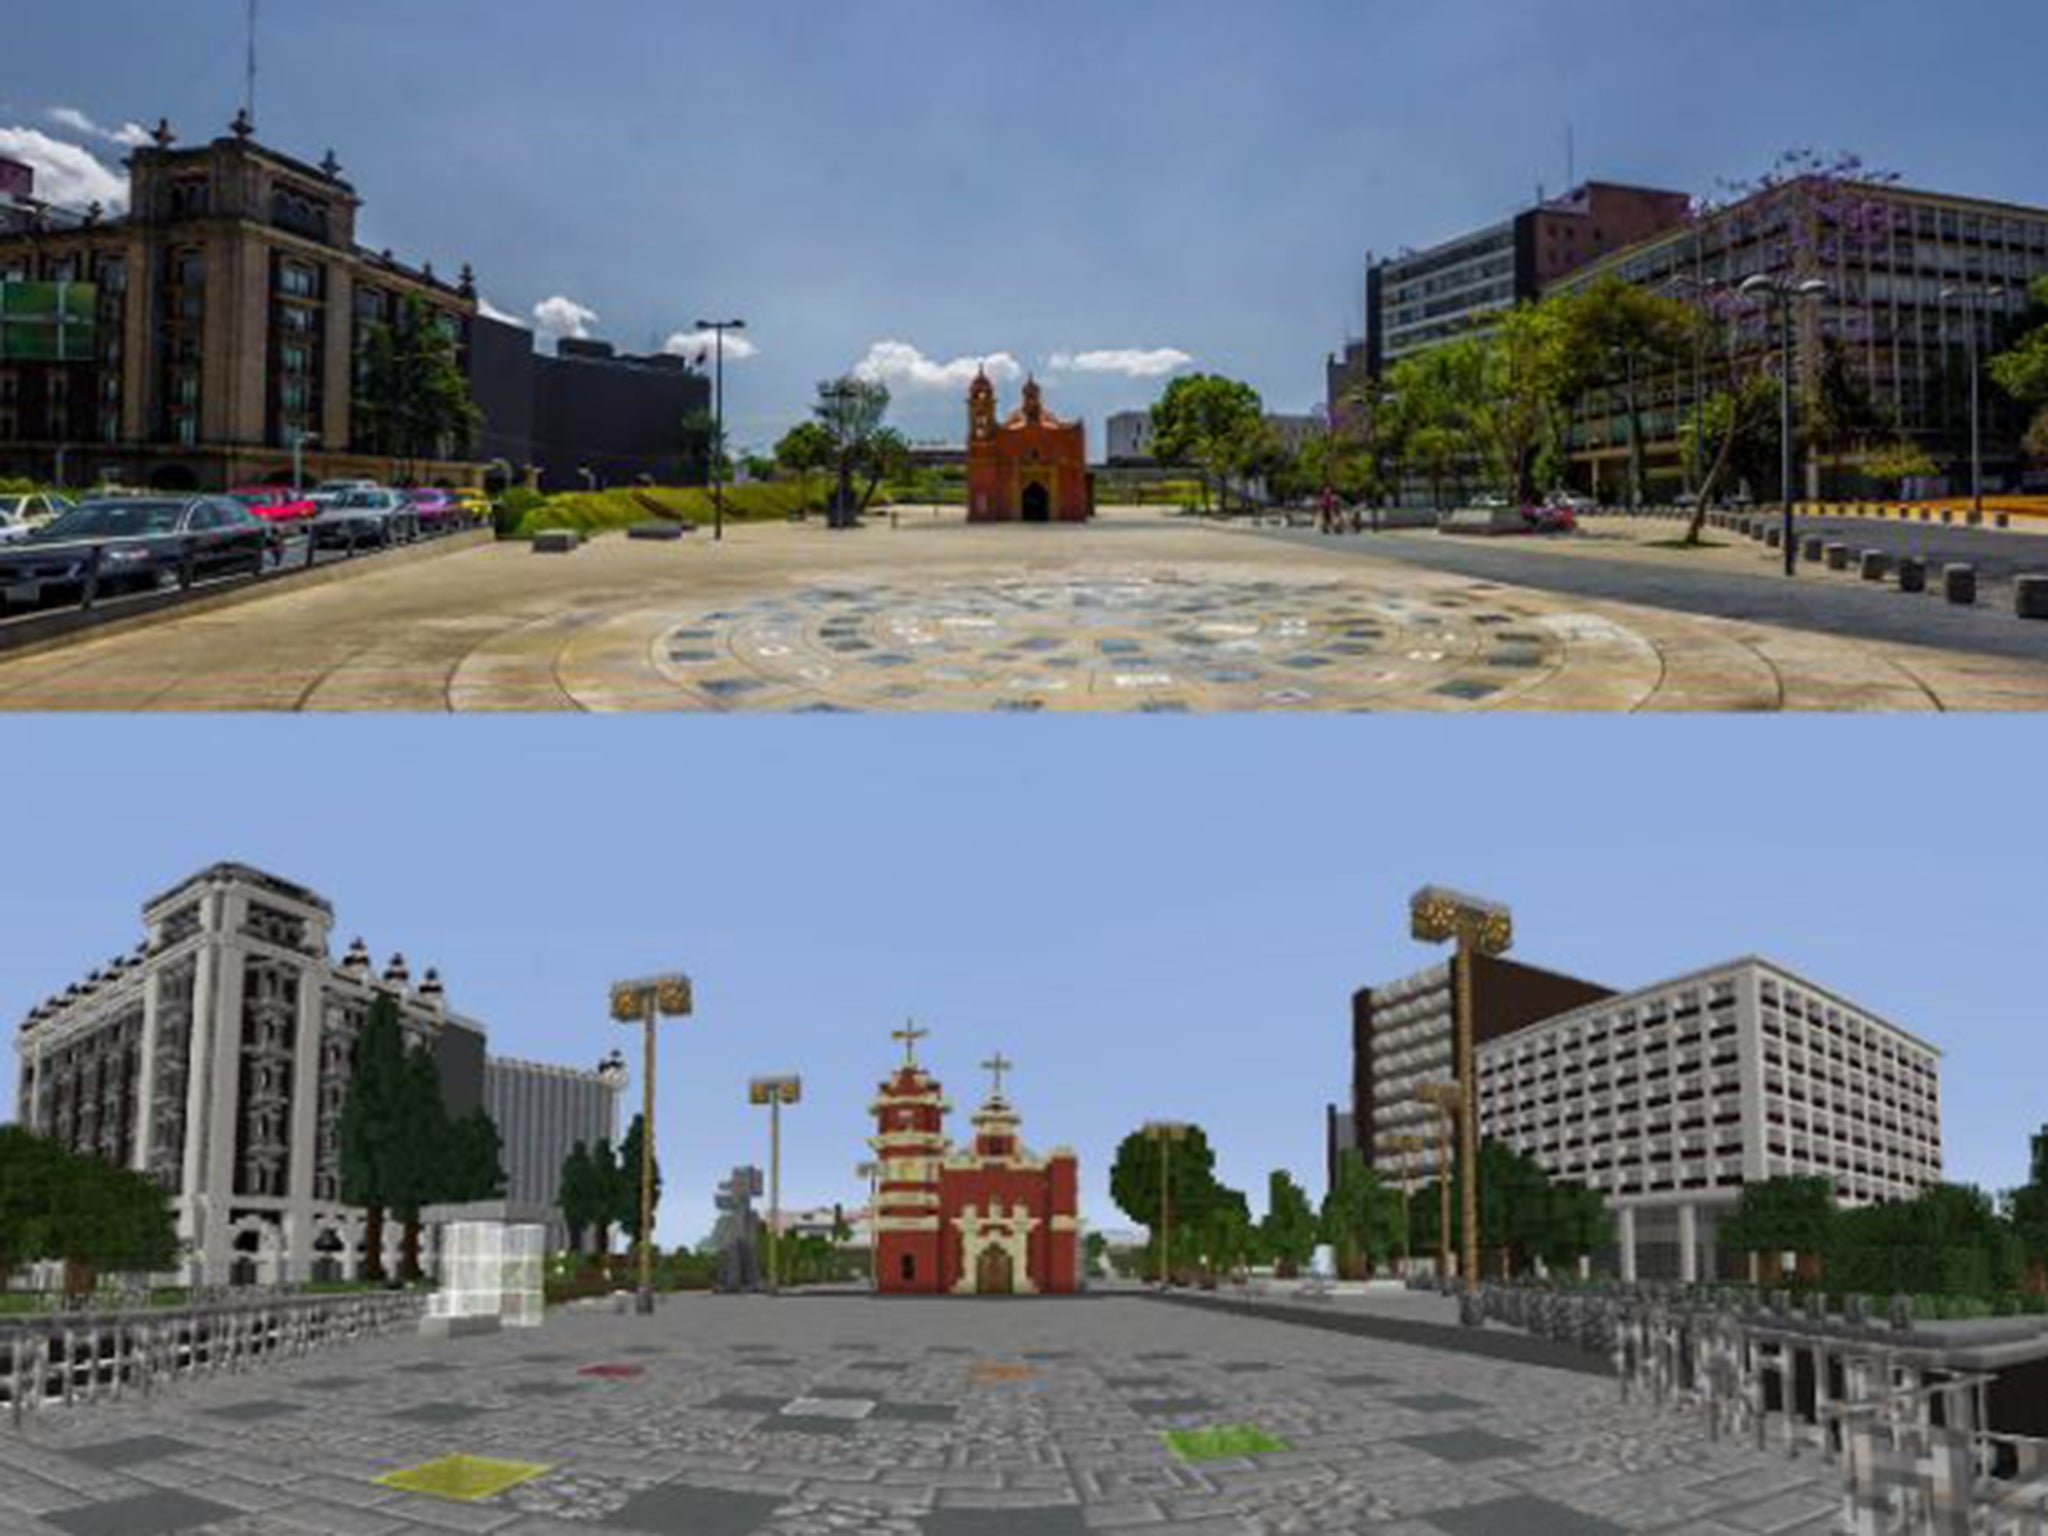 Another brick in the wall: Plaza Tlaxcoaque, a square in central Mexico City (top) and children’s efforts to redesign it on Minecraft